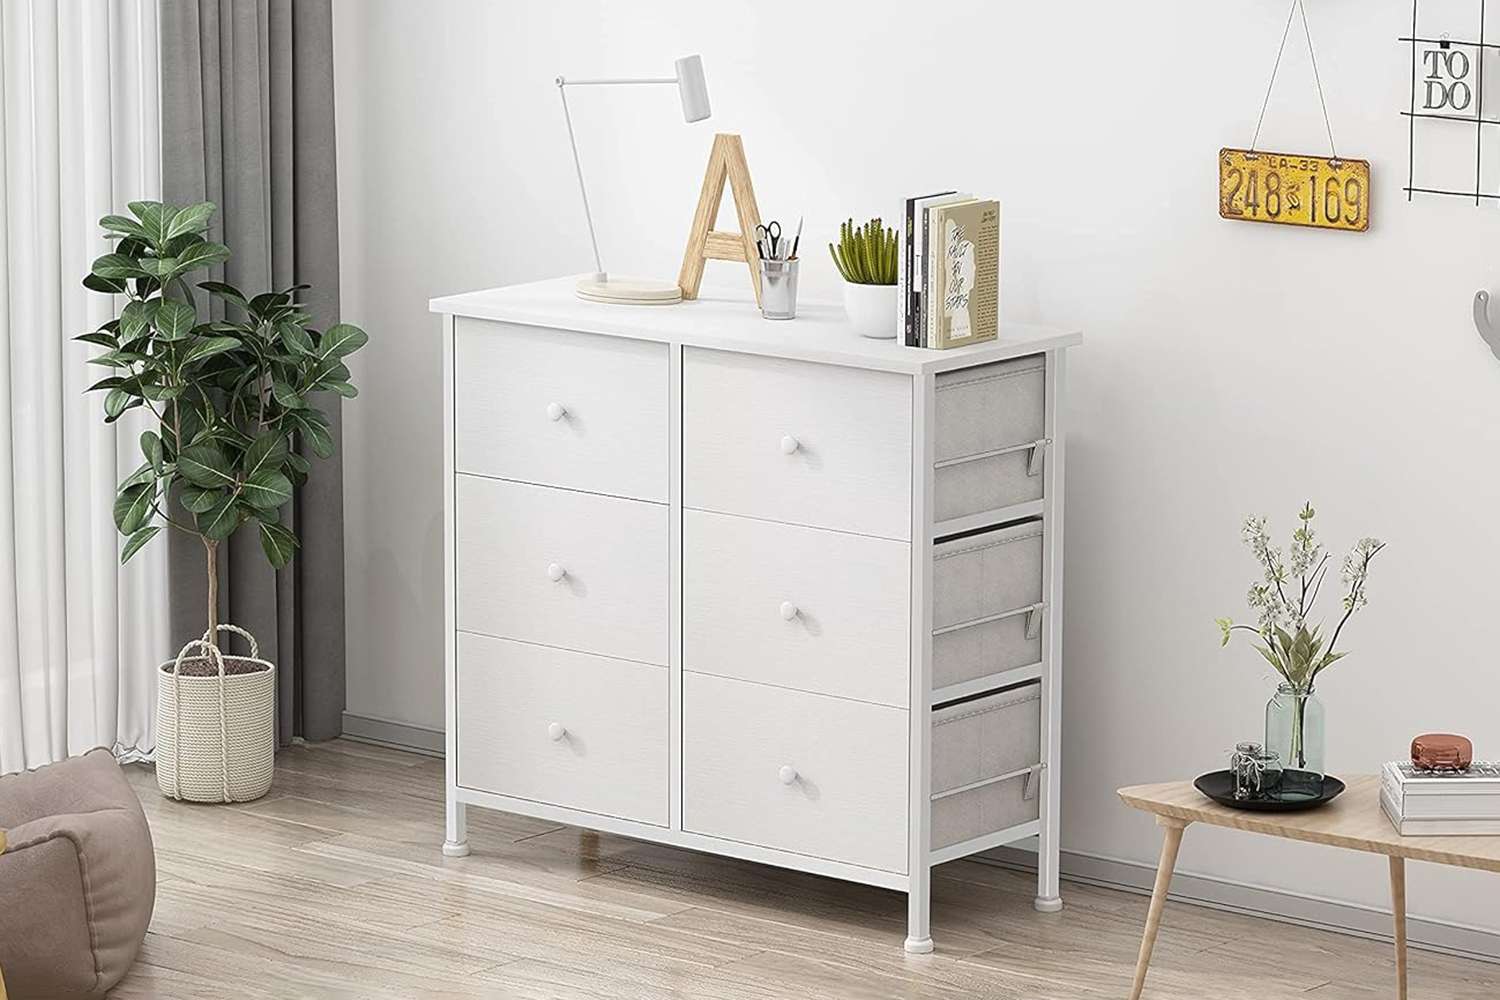 BOLUO White Dresser for Bedroom 6 Drawer Organizers Fabric Storage Chest Tower Small Dressers Unit for Closet Nursery Hallway Office, Kids and Adult Modern